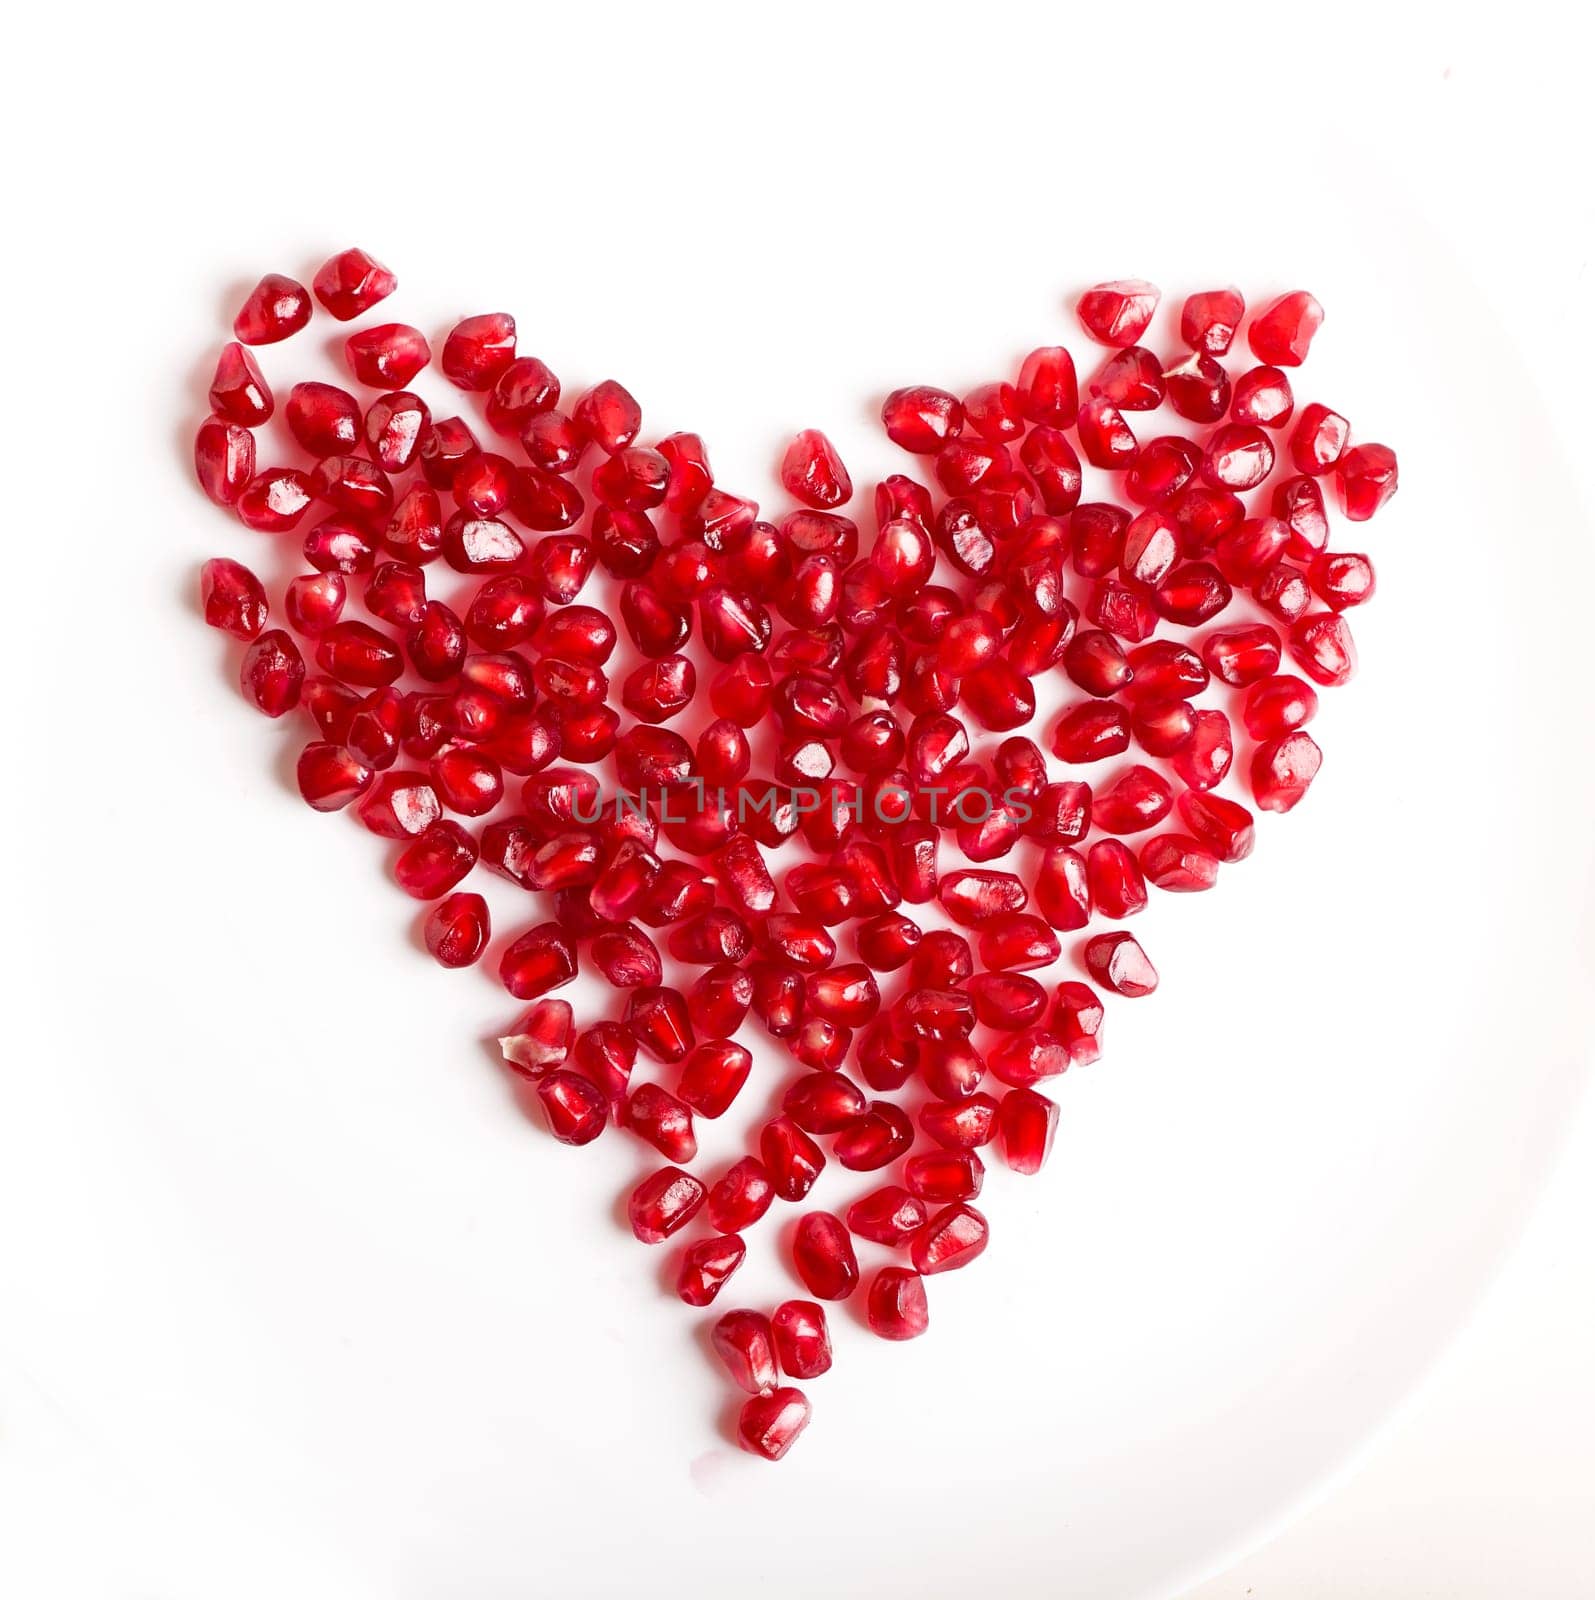 pomegranate seeds in the form of a heart on a white background. Cut the pomegranate with scattered grain top view isolated on white background. by aprilphoto